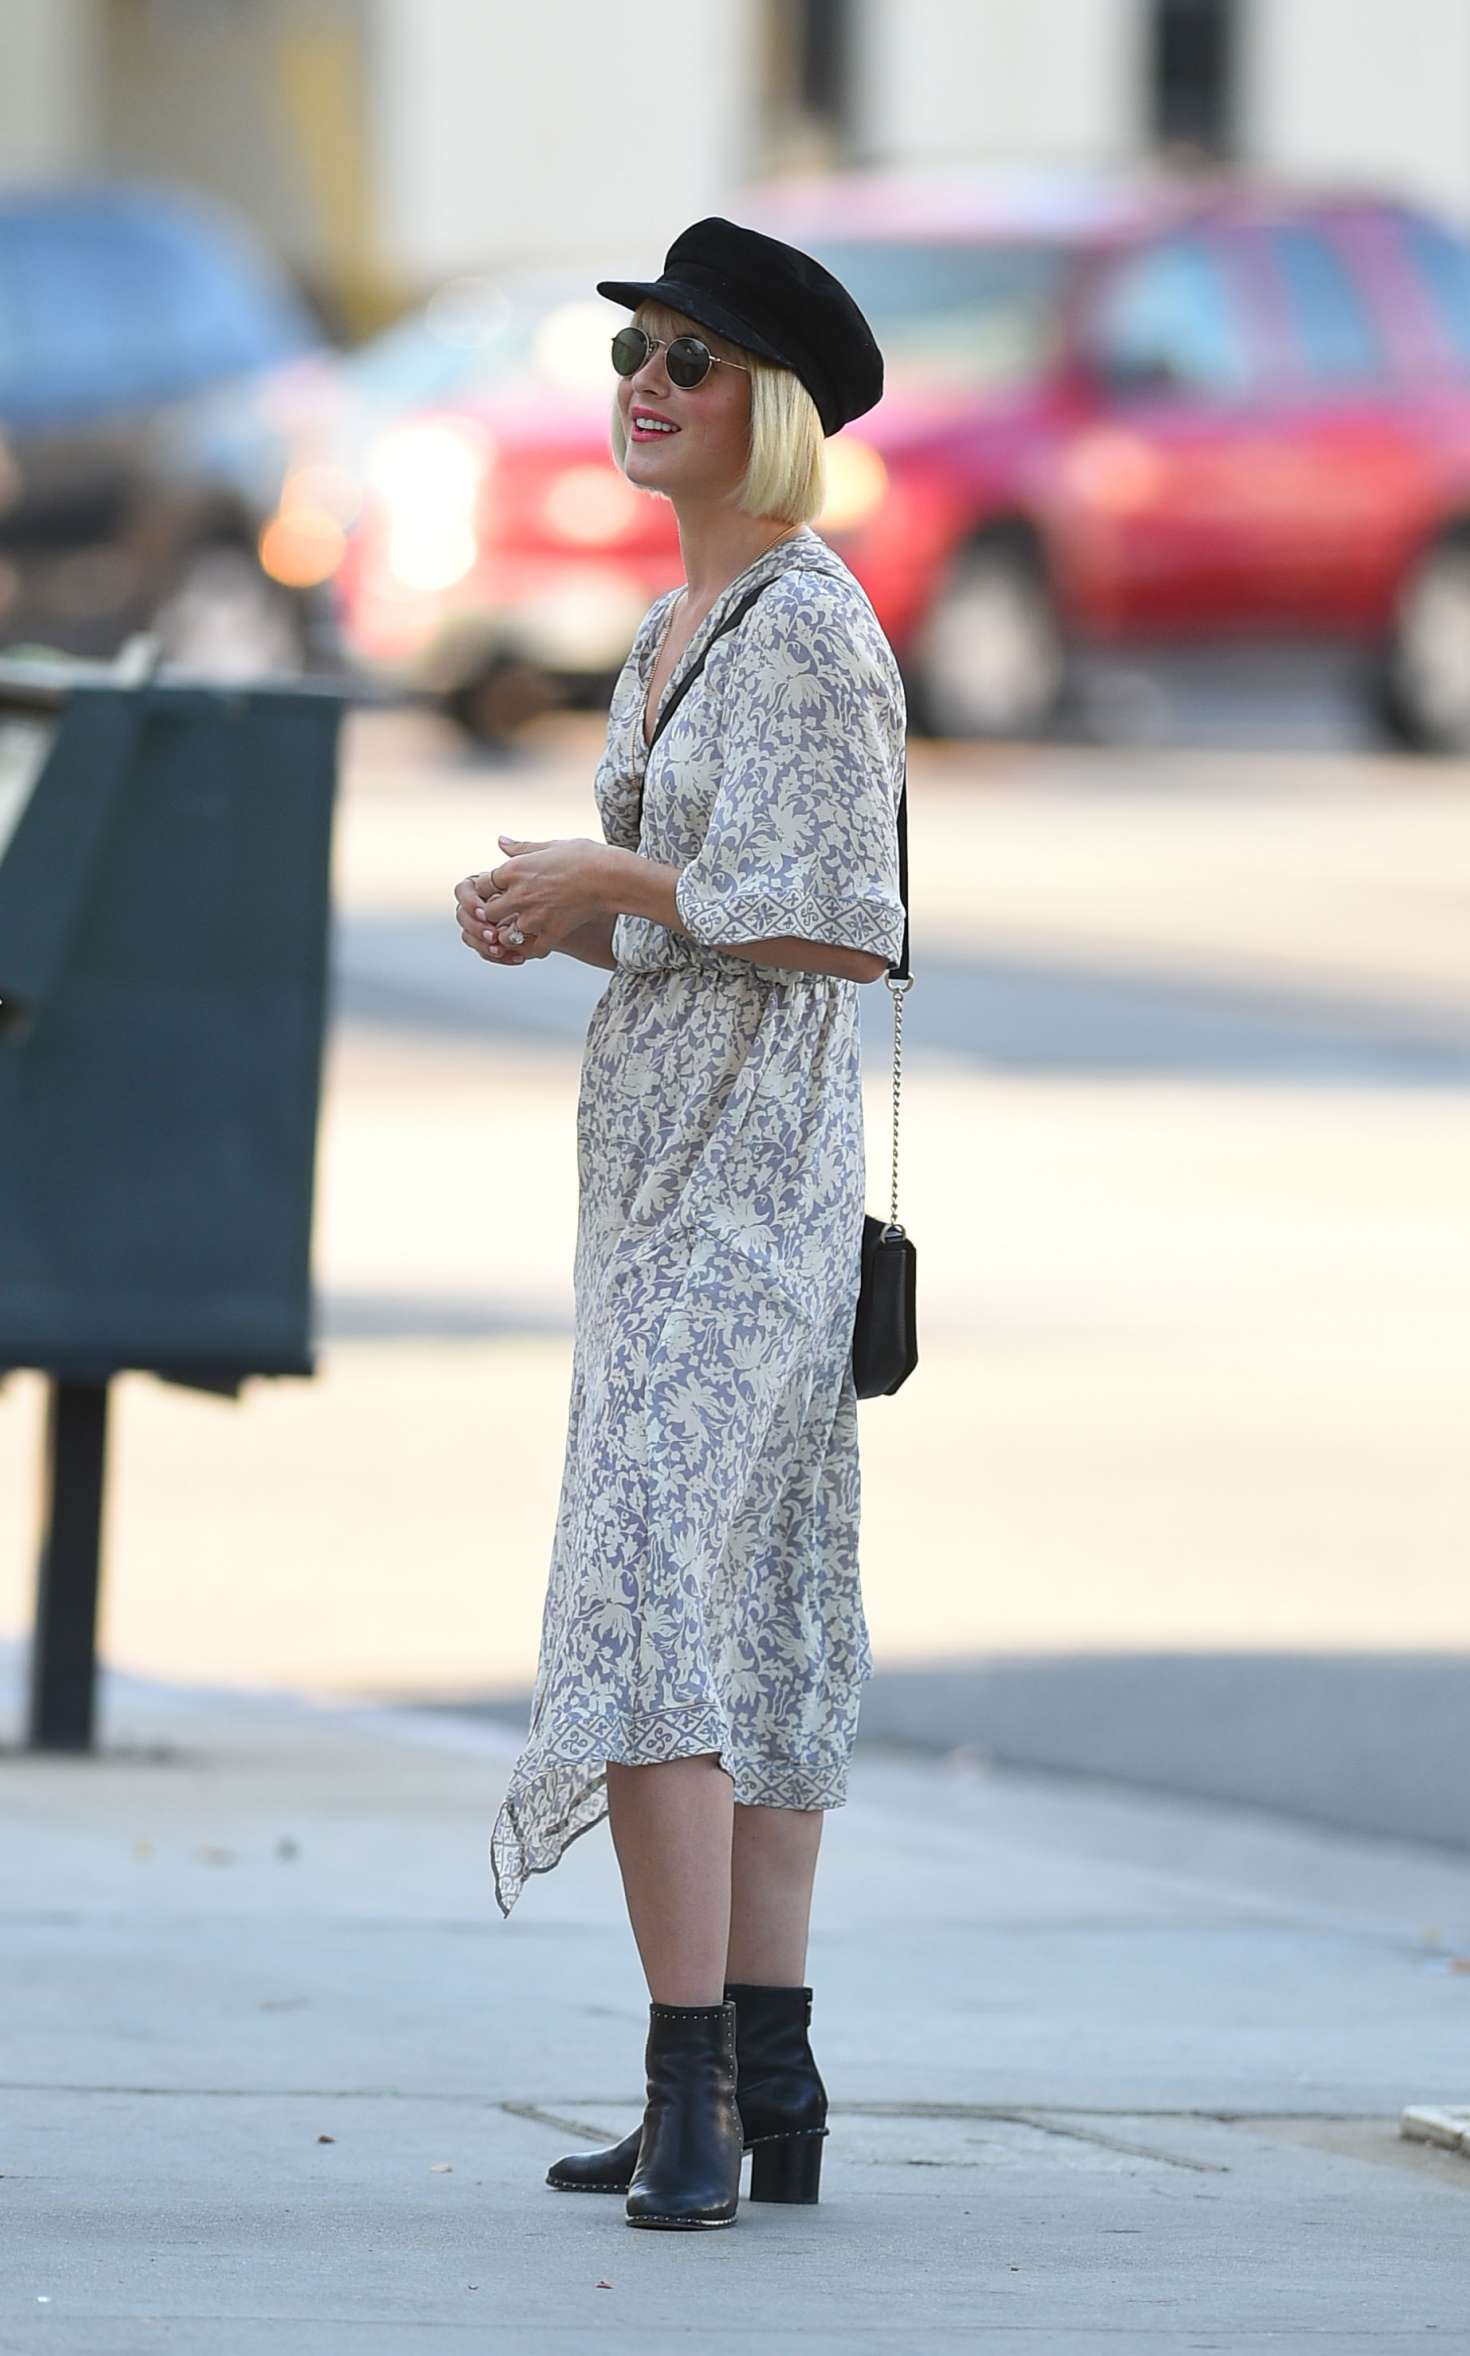 Julianne Hough in Summer Dress â€“ Out and about in Los Angeles